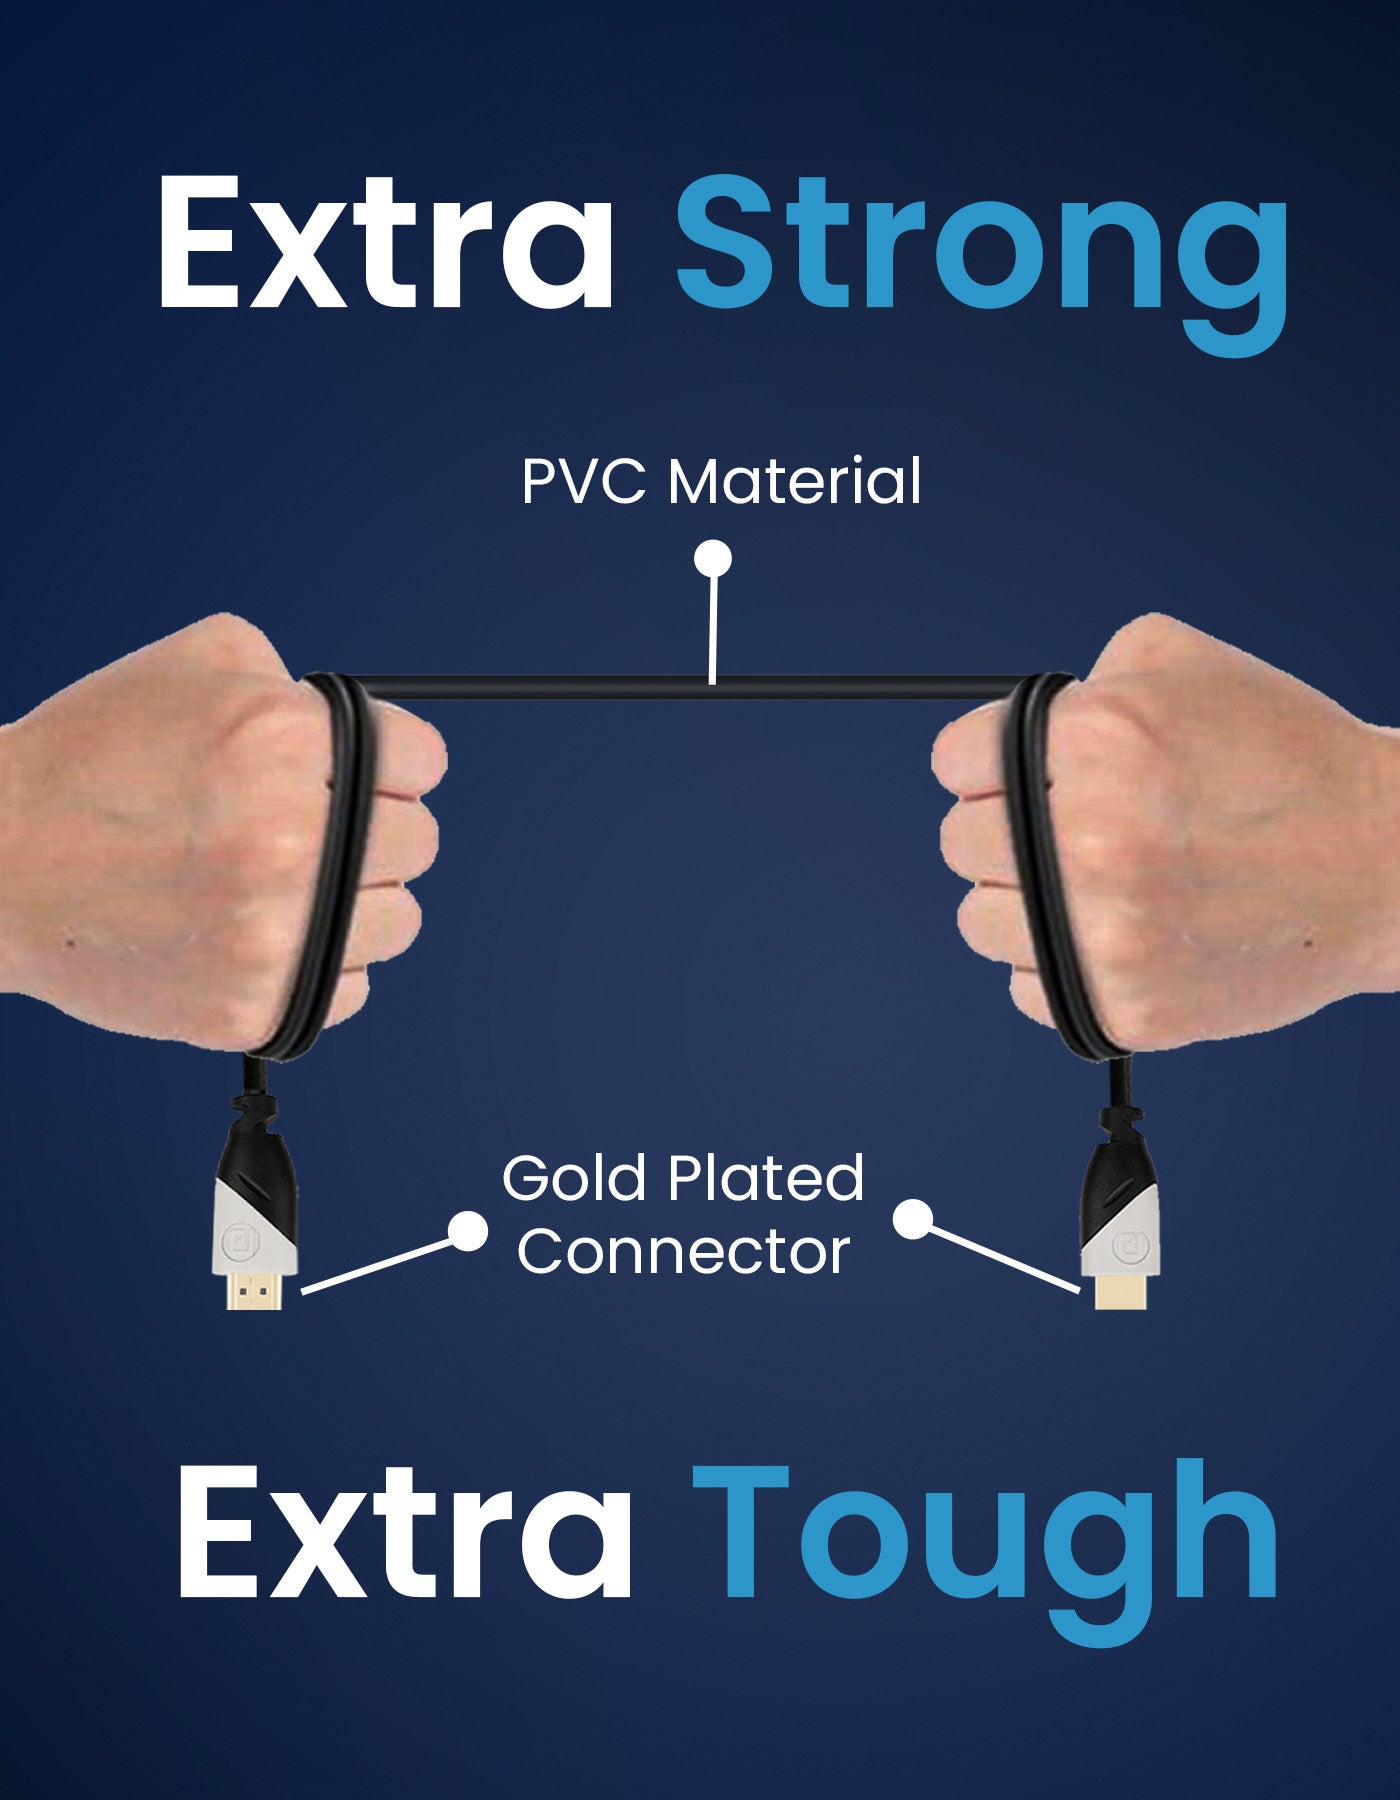 Portronics Konnect Sync- Extra strong HDMI to HDMI cable